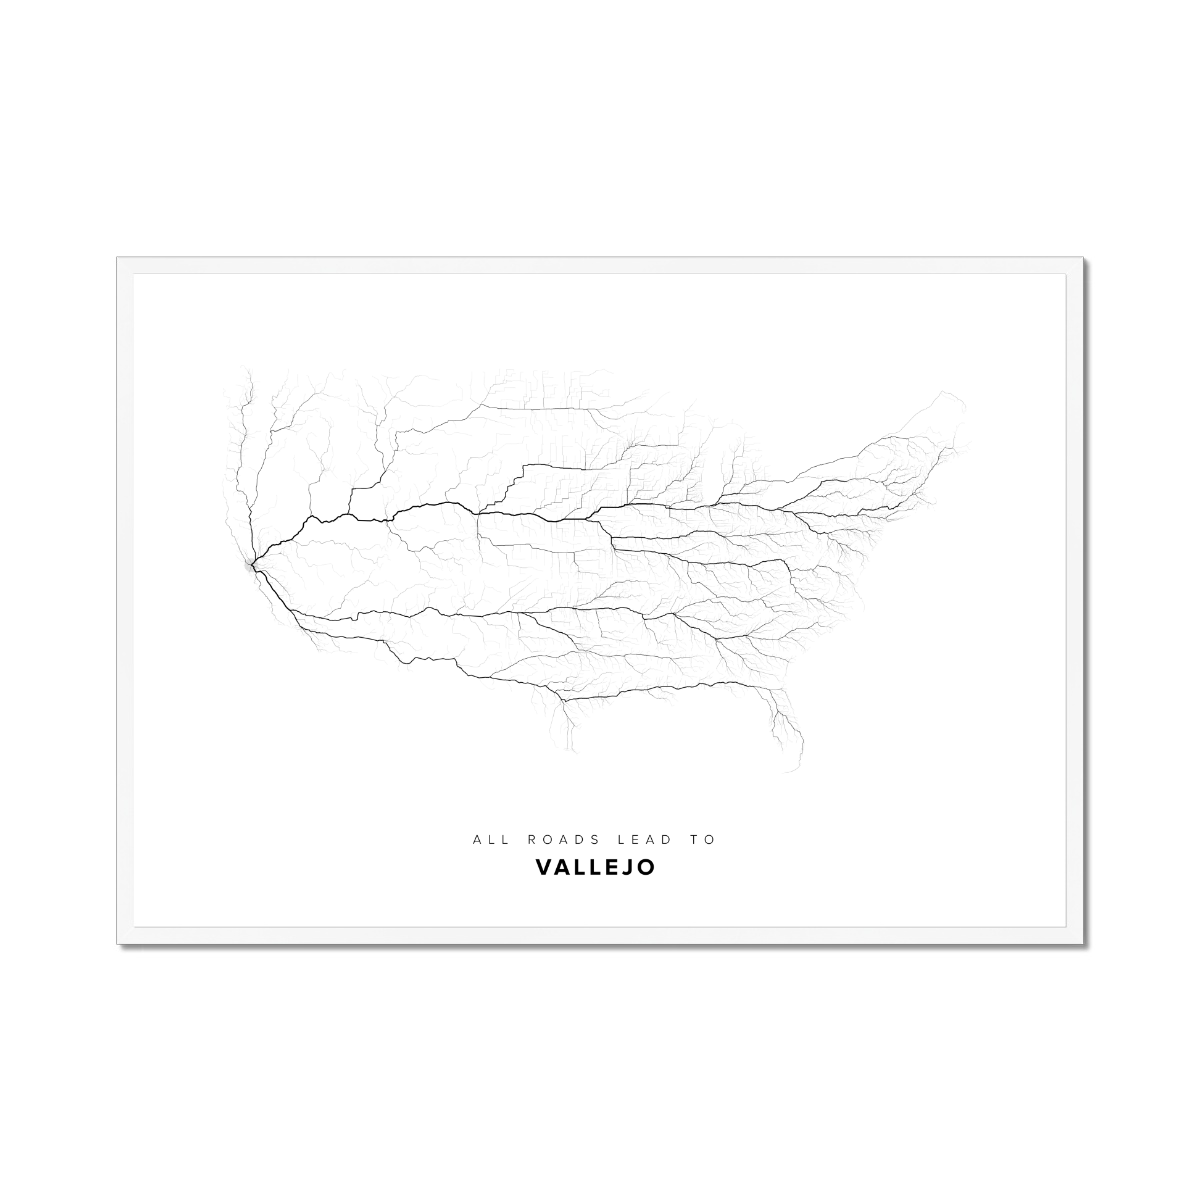 All roads lead to Vallejo (United States of America) Fine Art Map Print